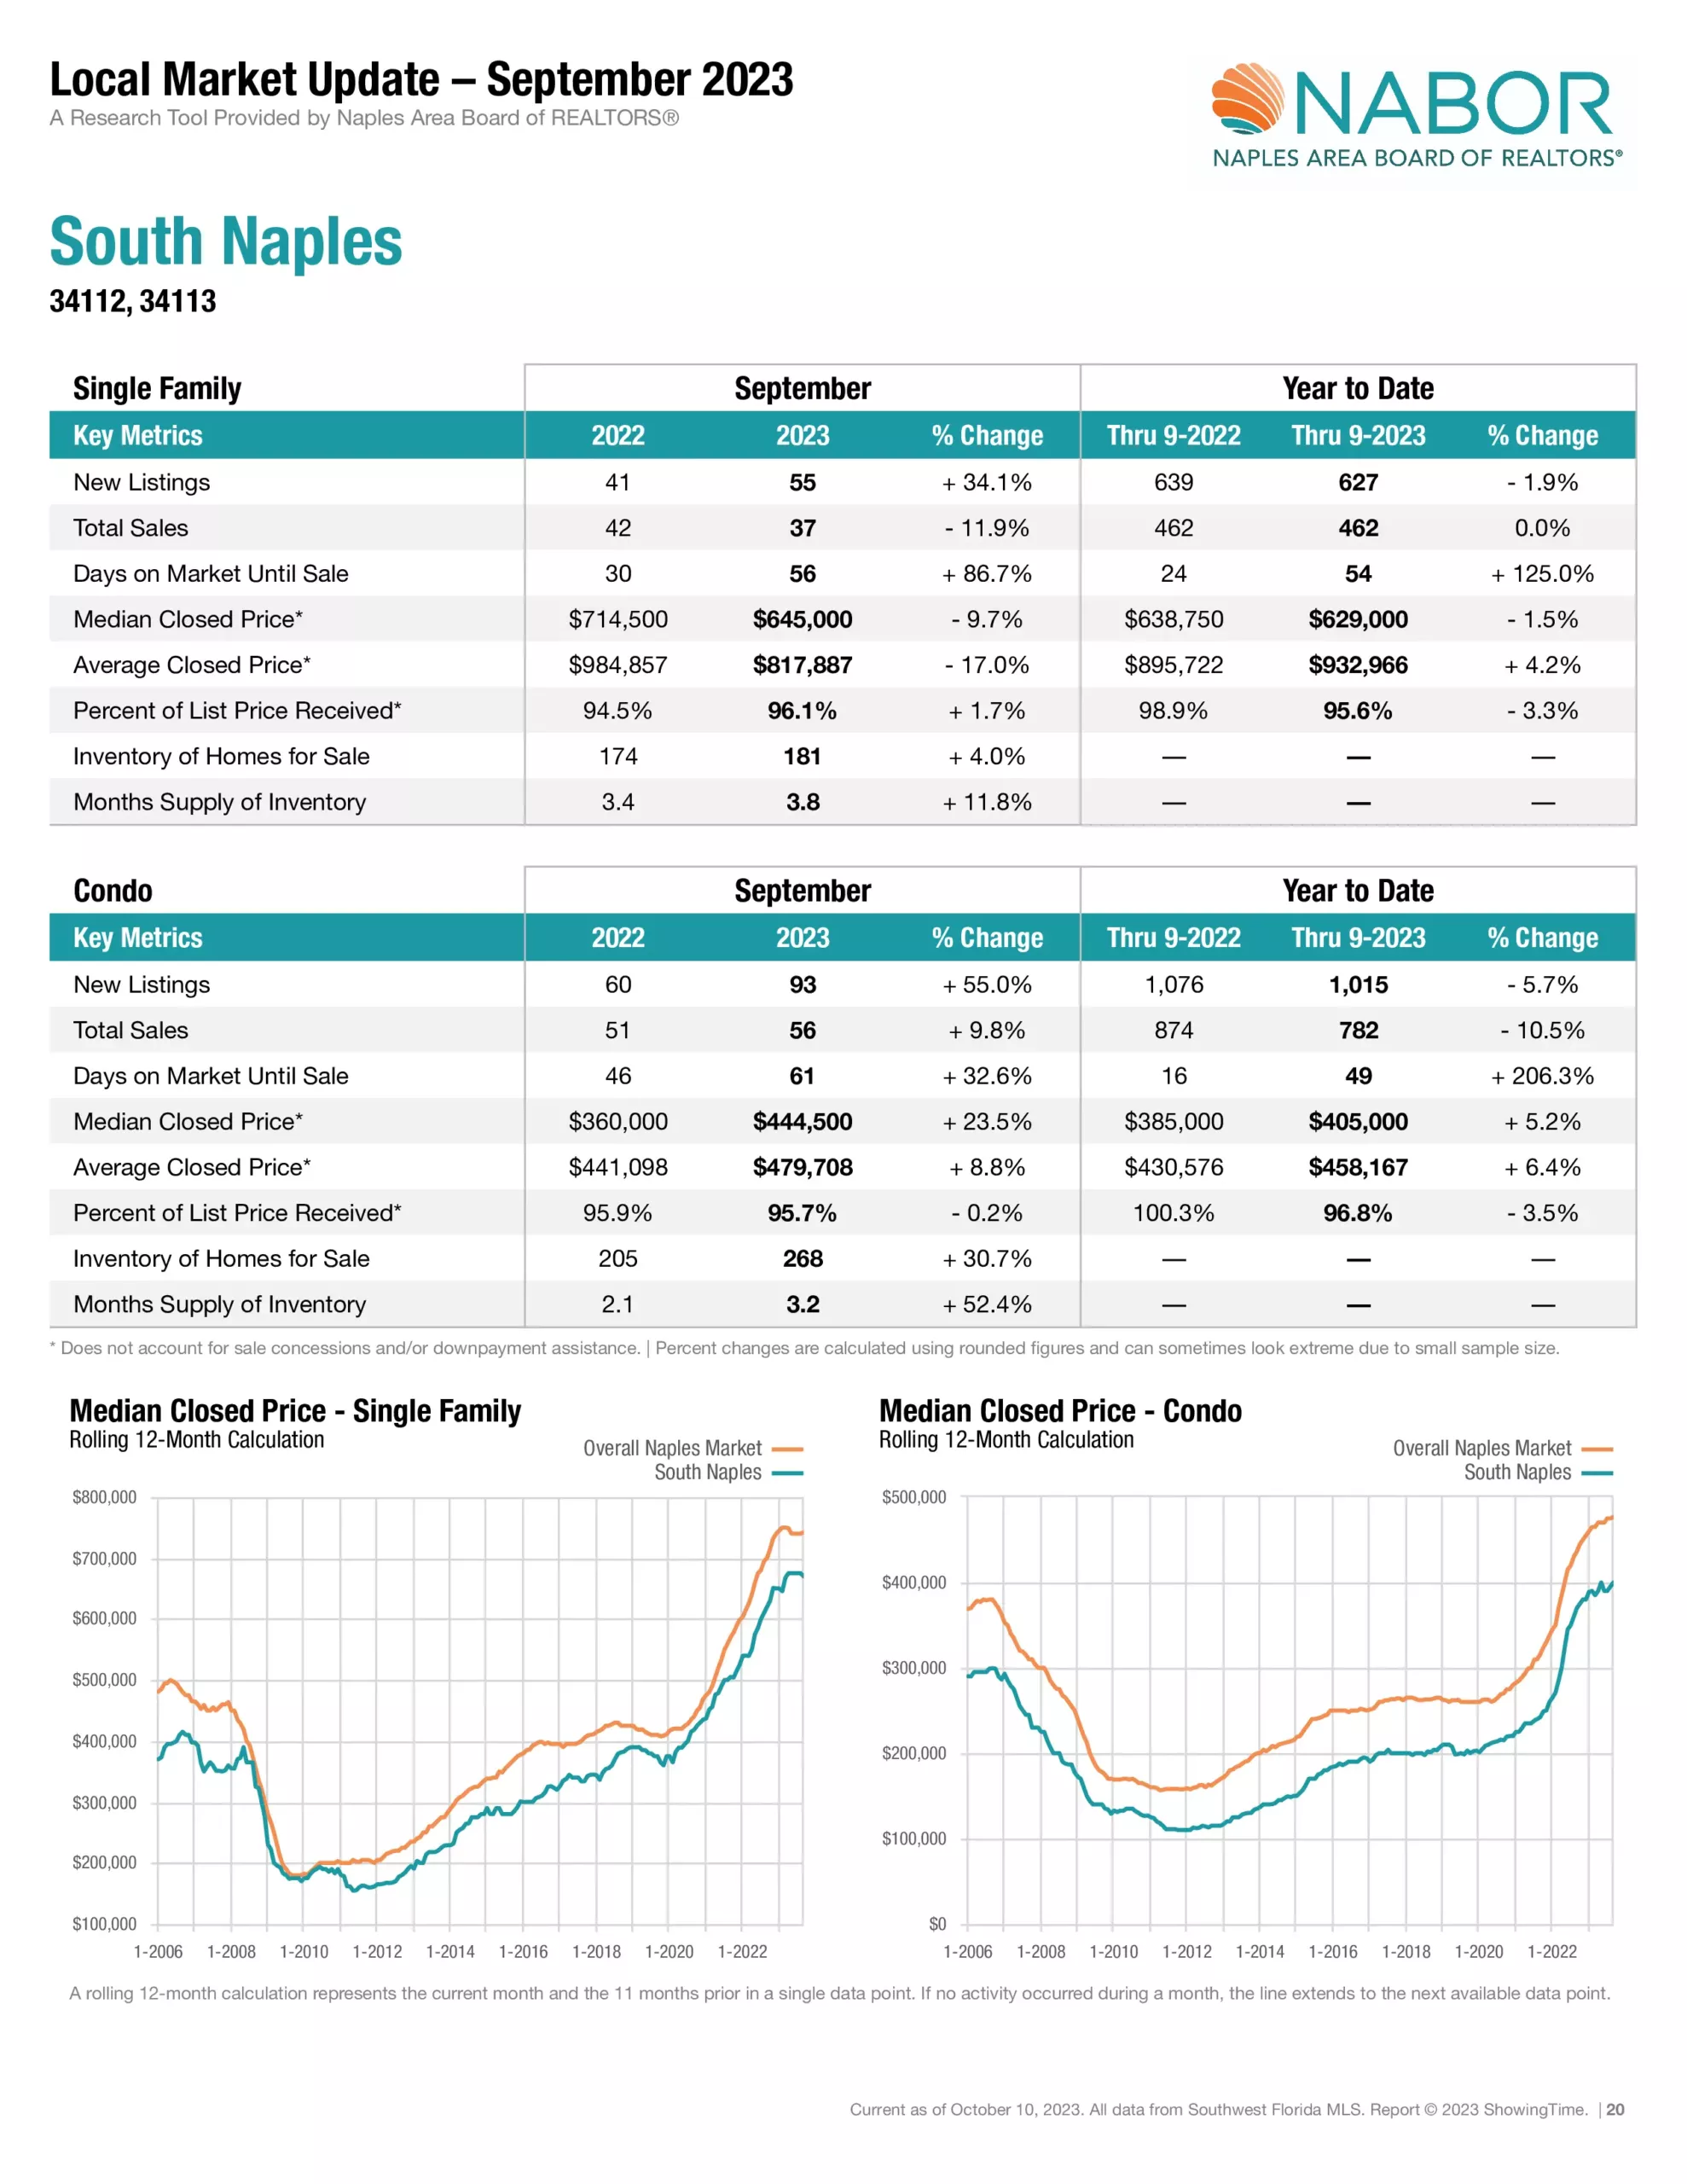 Local Market Update – August 2023 Central Naples